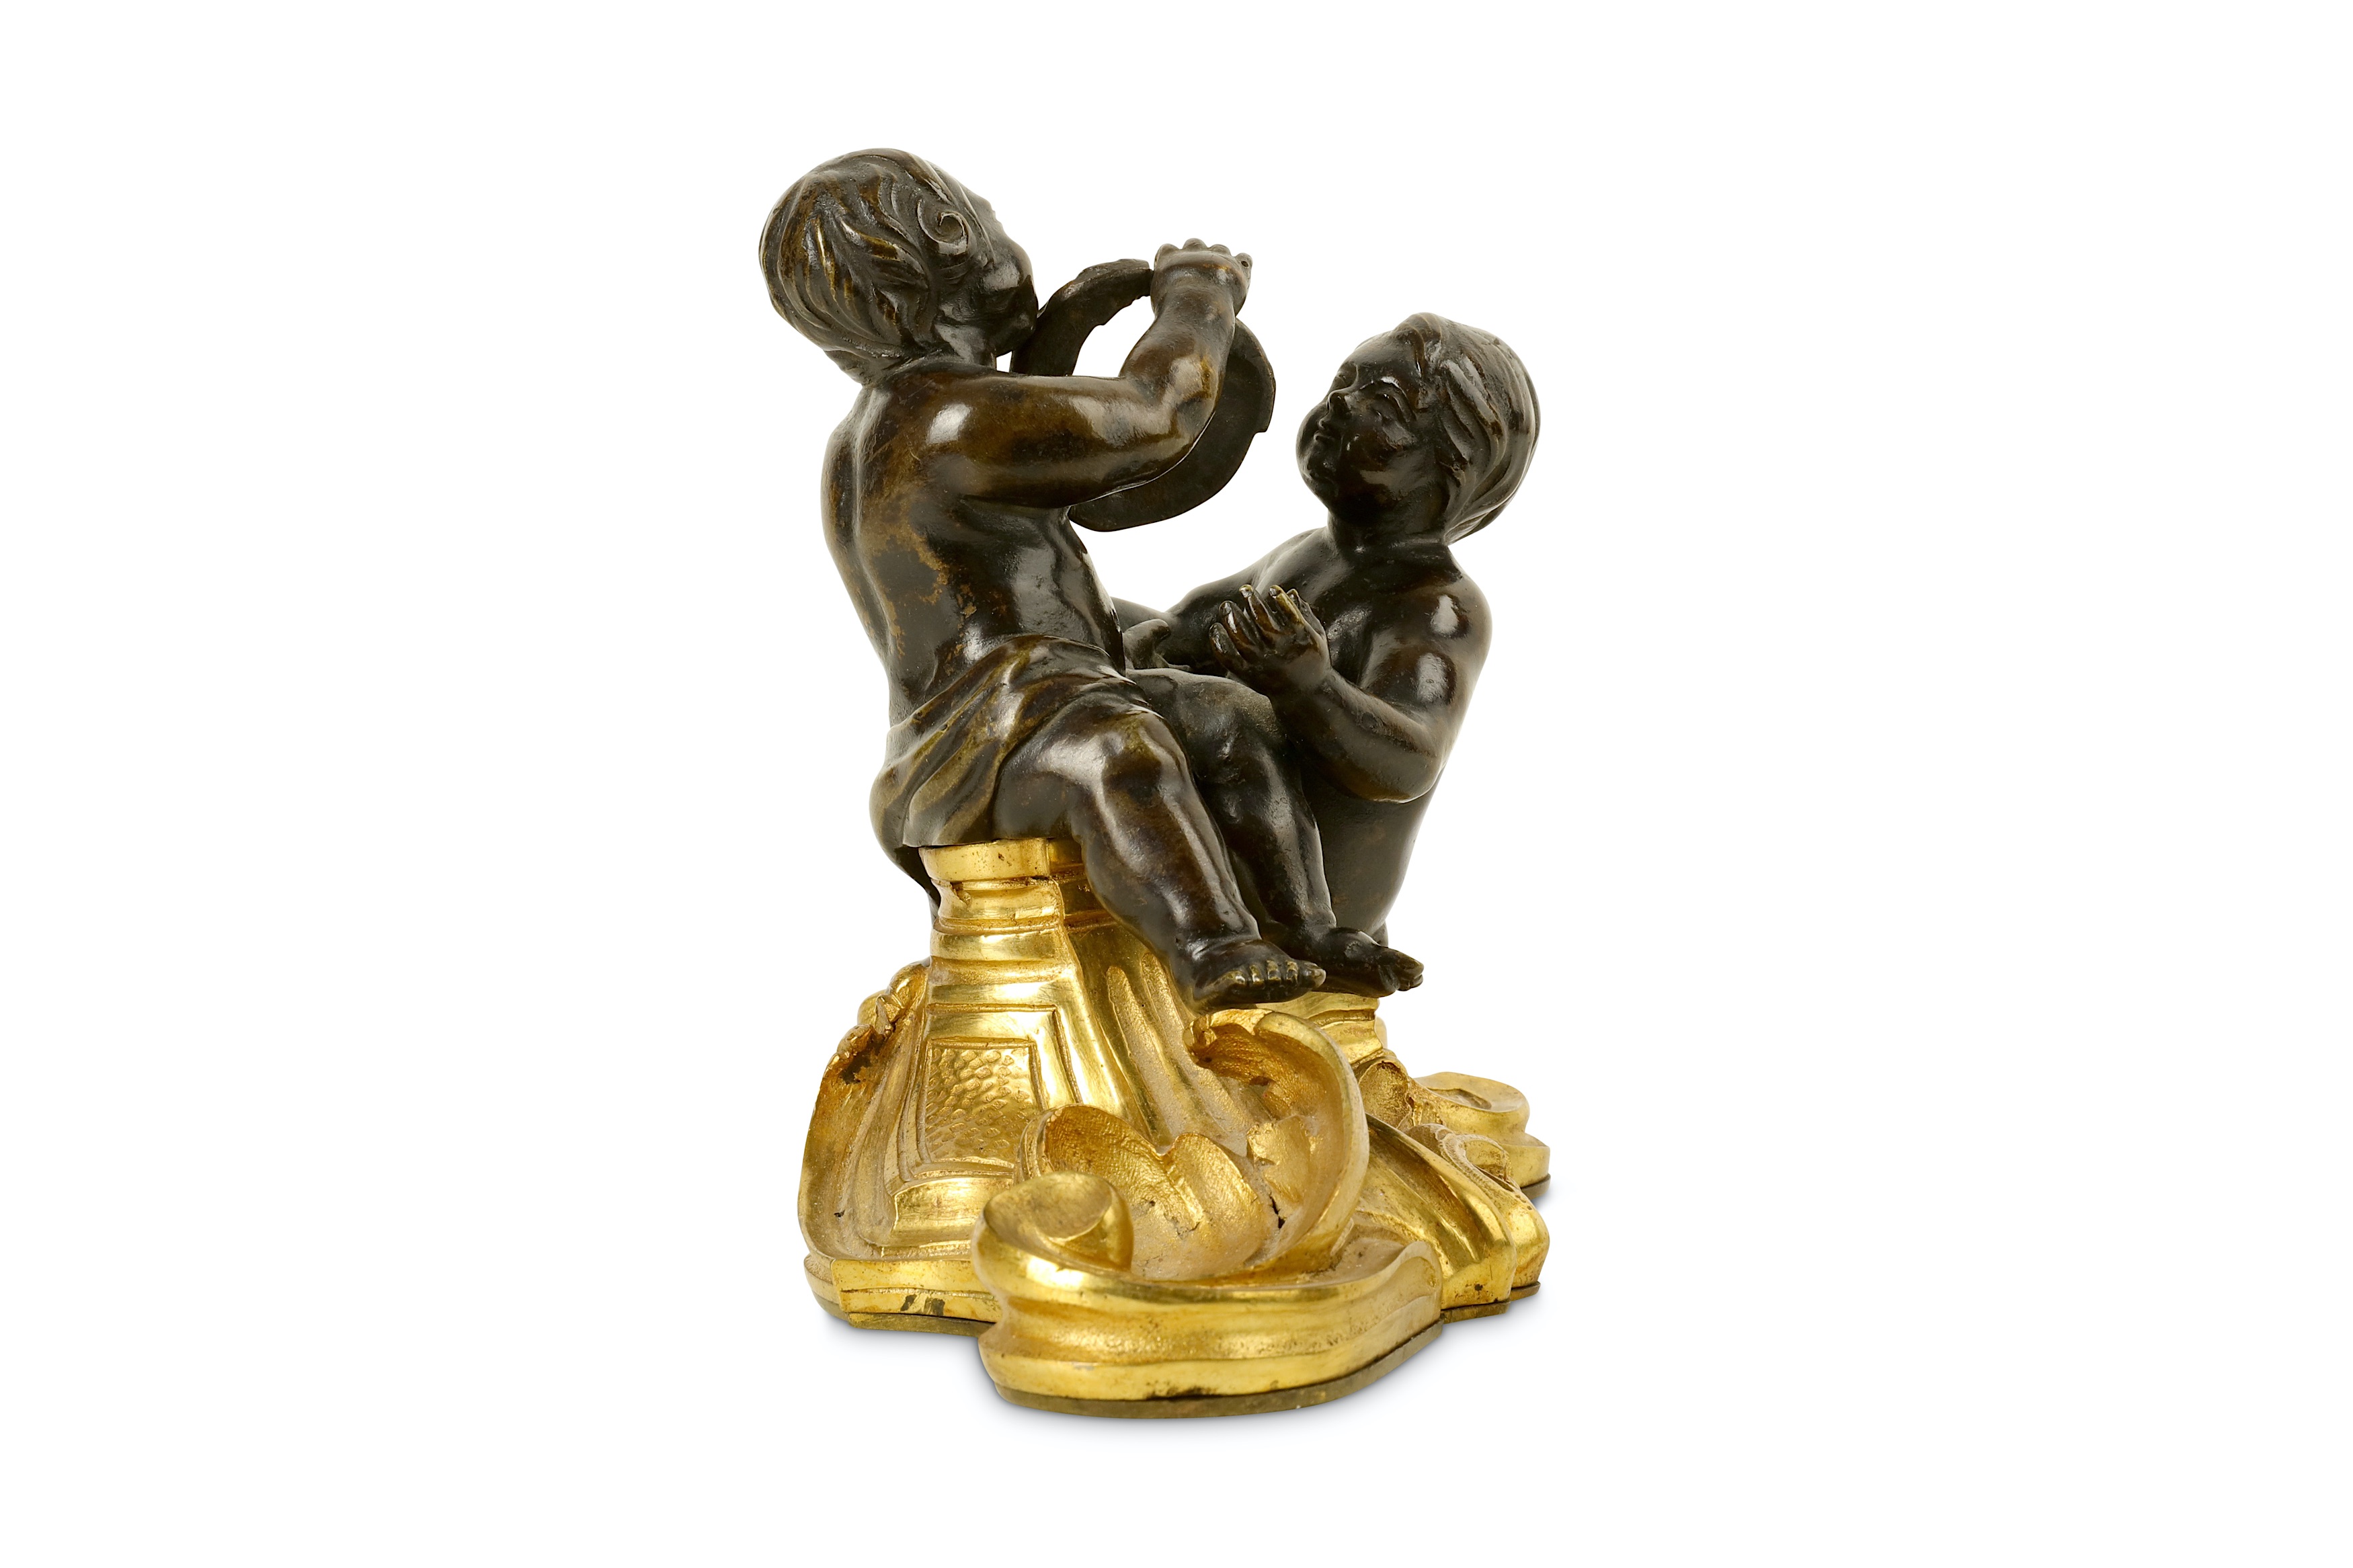 A MID 18TH CENTURY FRENCH BRONZE FIGURAL GROUP OF TWO PUTTI PLAYING WITH A WREATH - Image 6 of 7